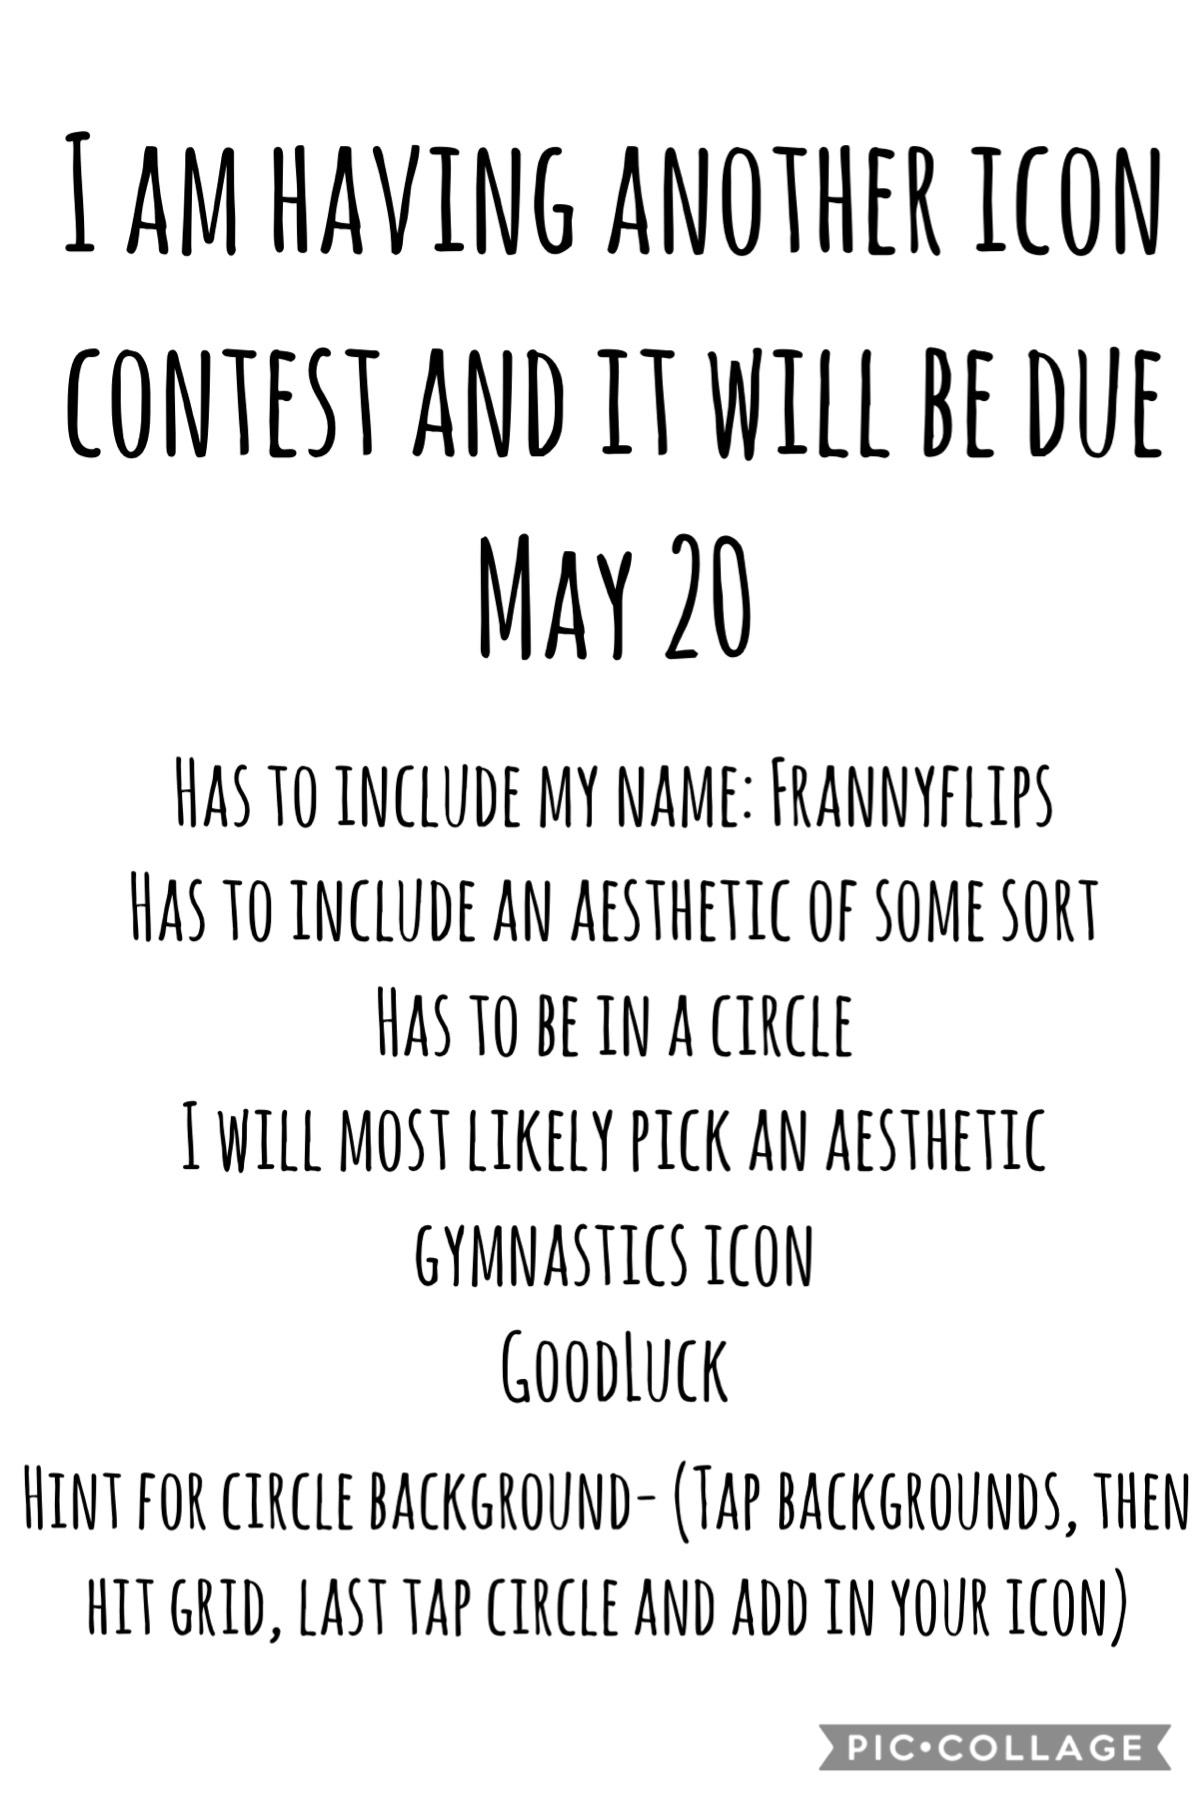 Please you don’t have to be following to join this contest...so please join!!